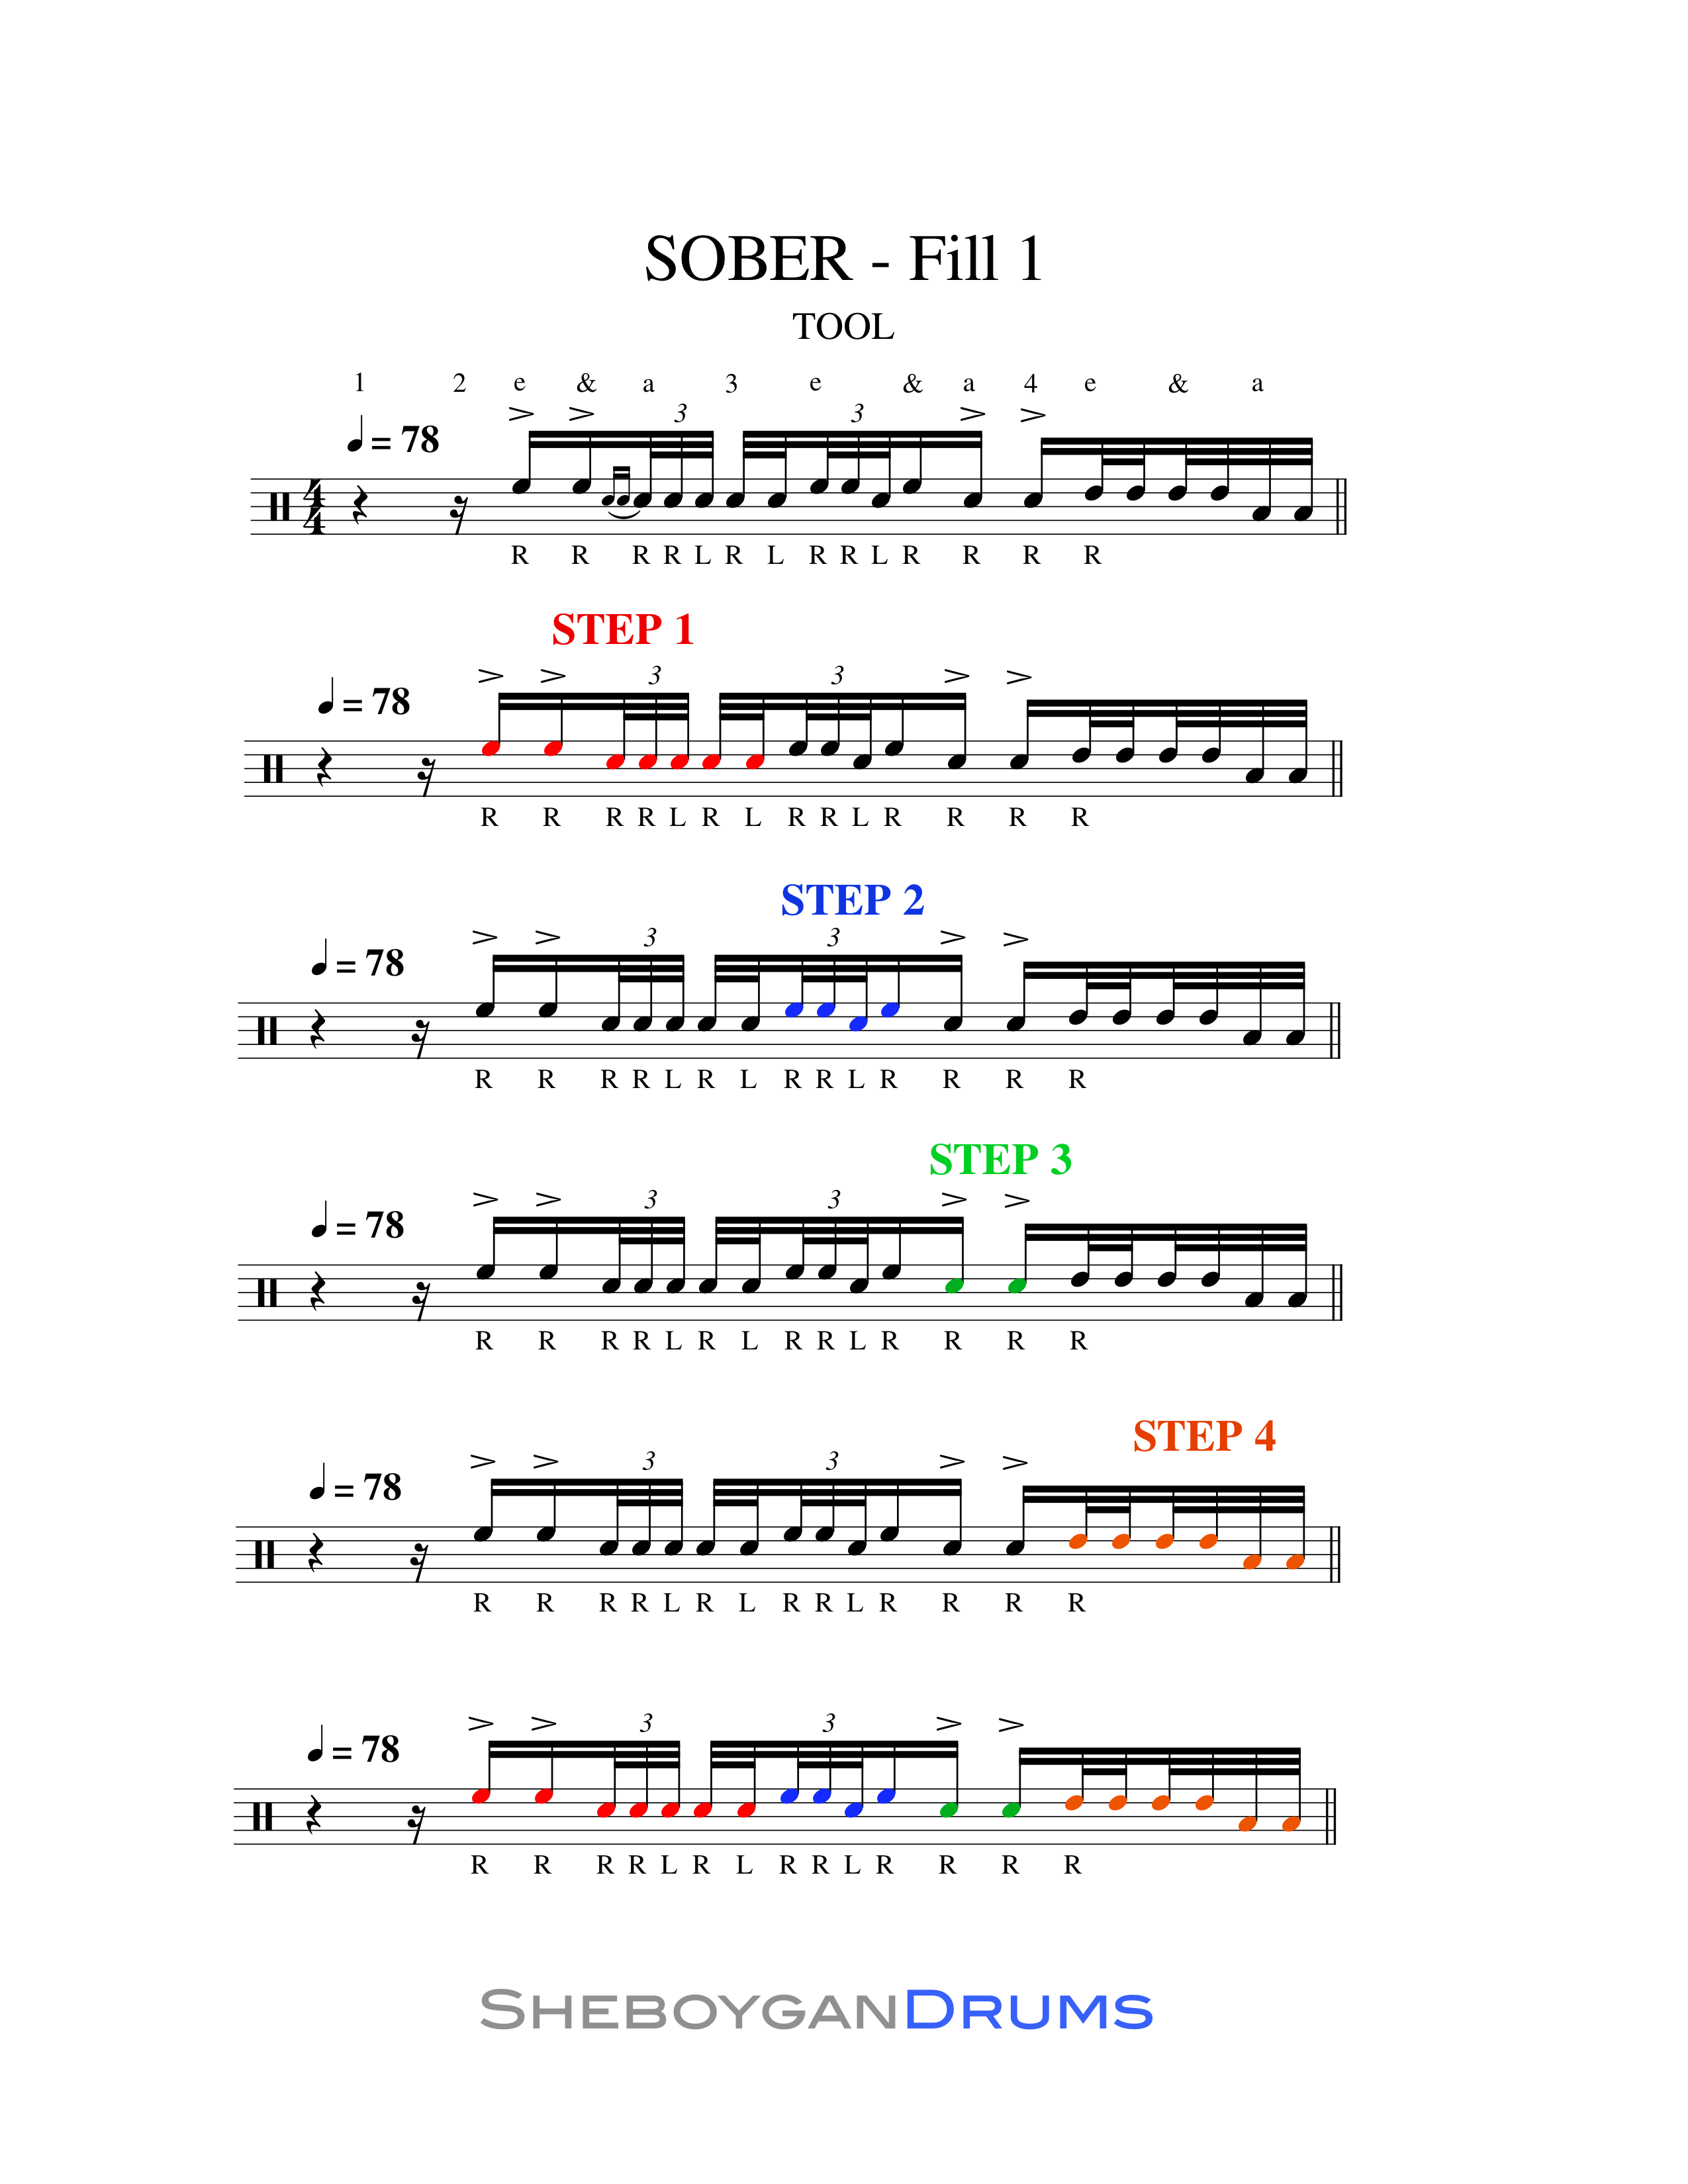 Sheet Music for TOOL Sober Opening Drum Fill